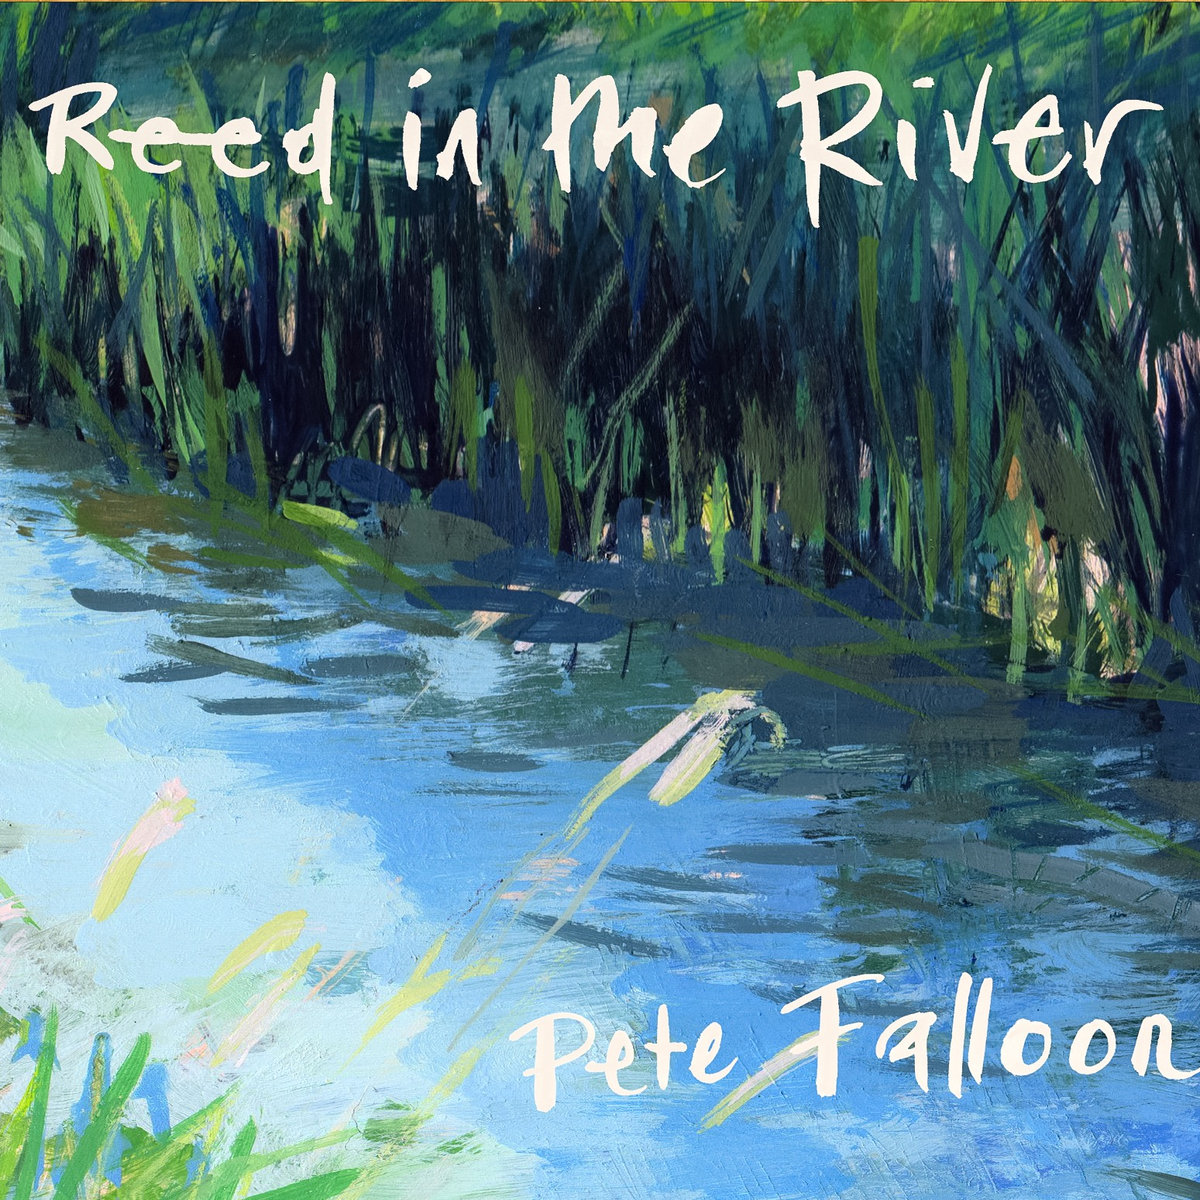 ALBUM PREMIERE: Pete Falloon - Reed In The River